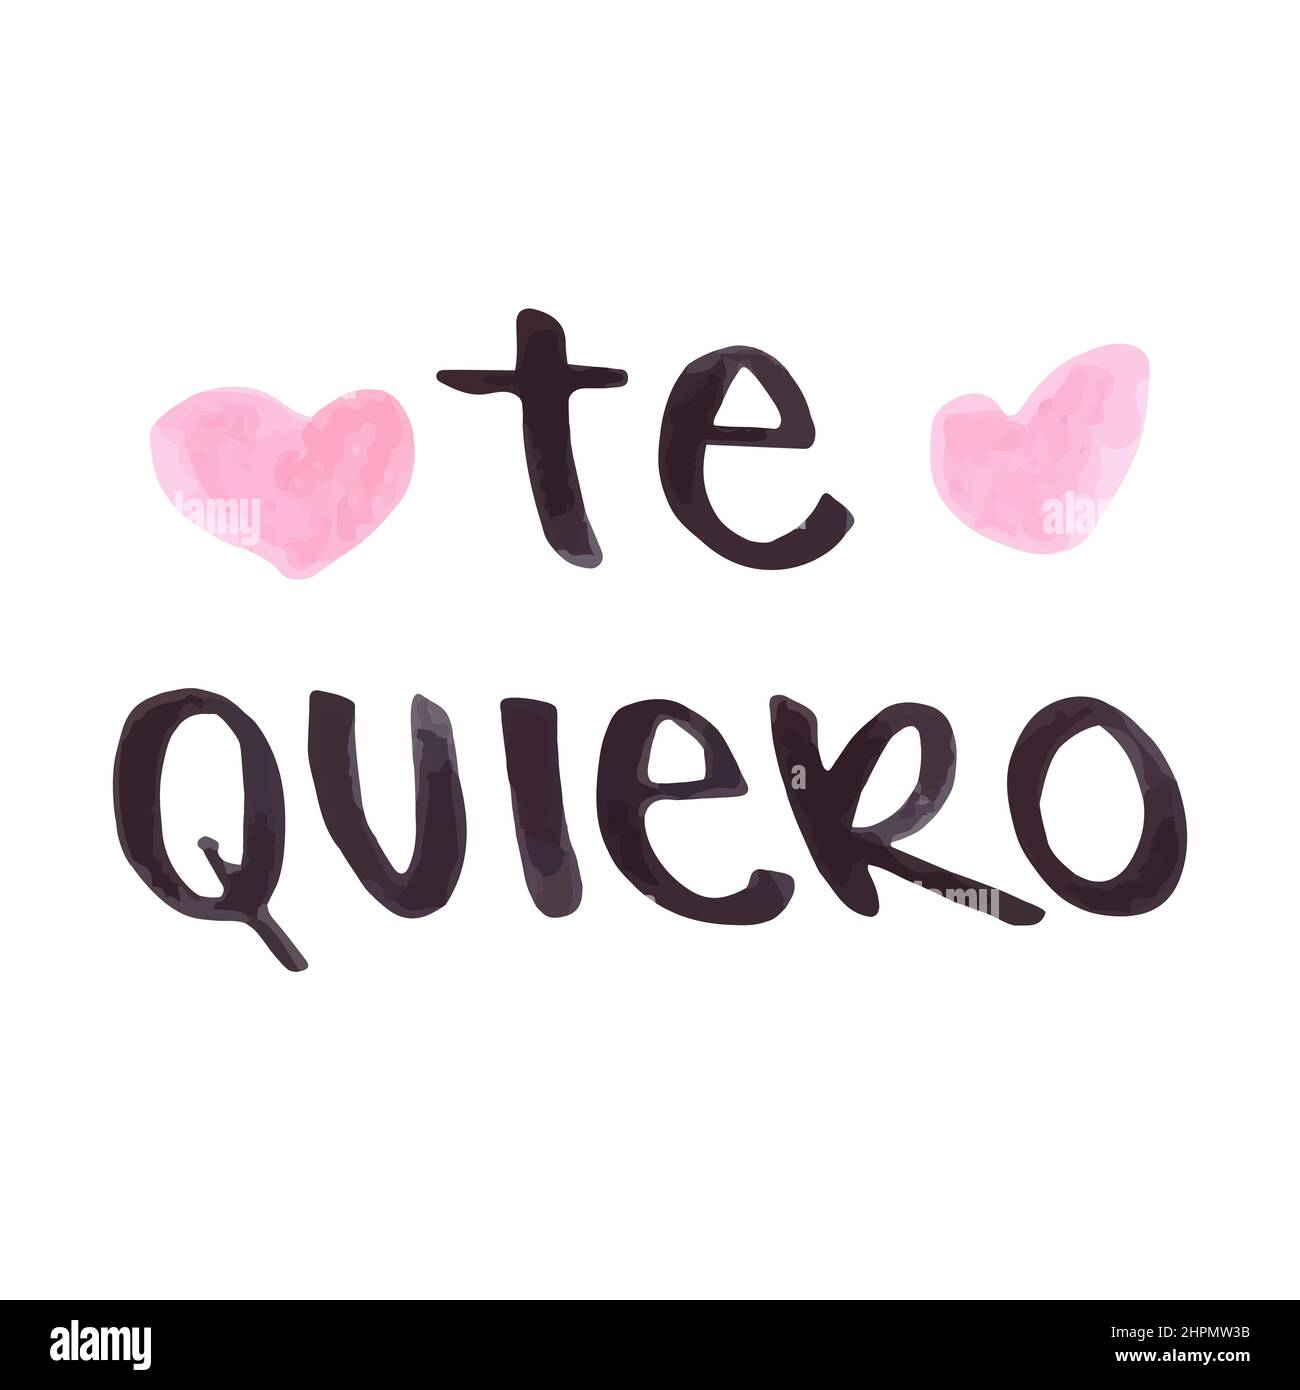 I love you in Spanish: 'Te quiero'. Hand drawn lettering with marker. Hearts shapes. Vector illustration, flat design Stock Vector